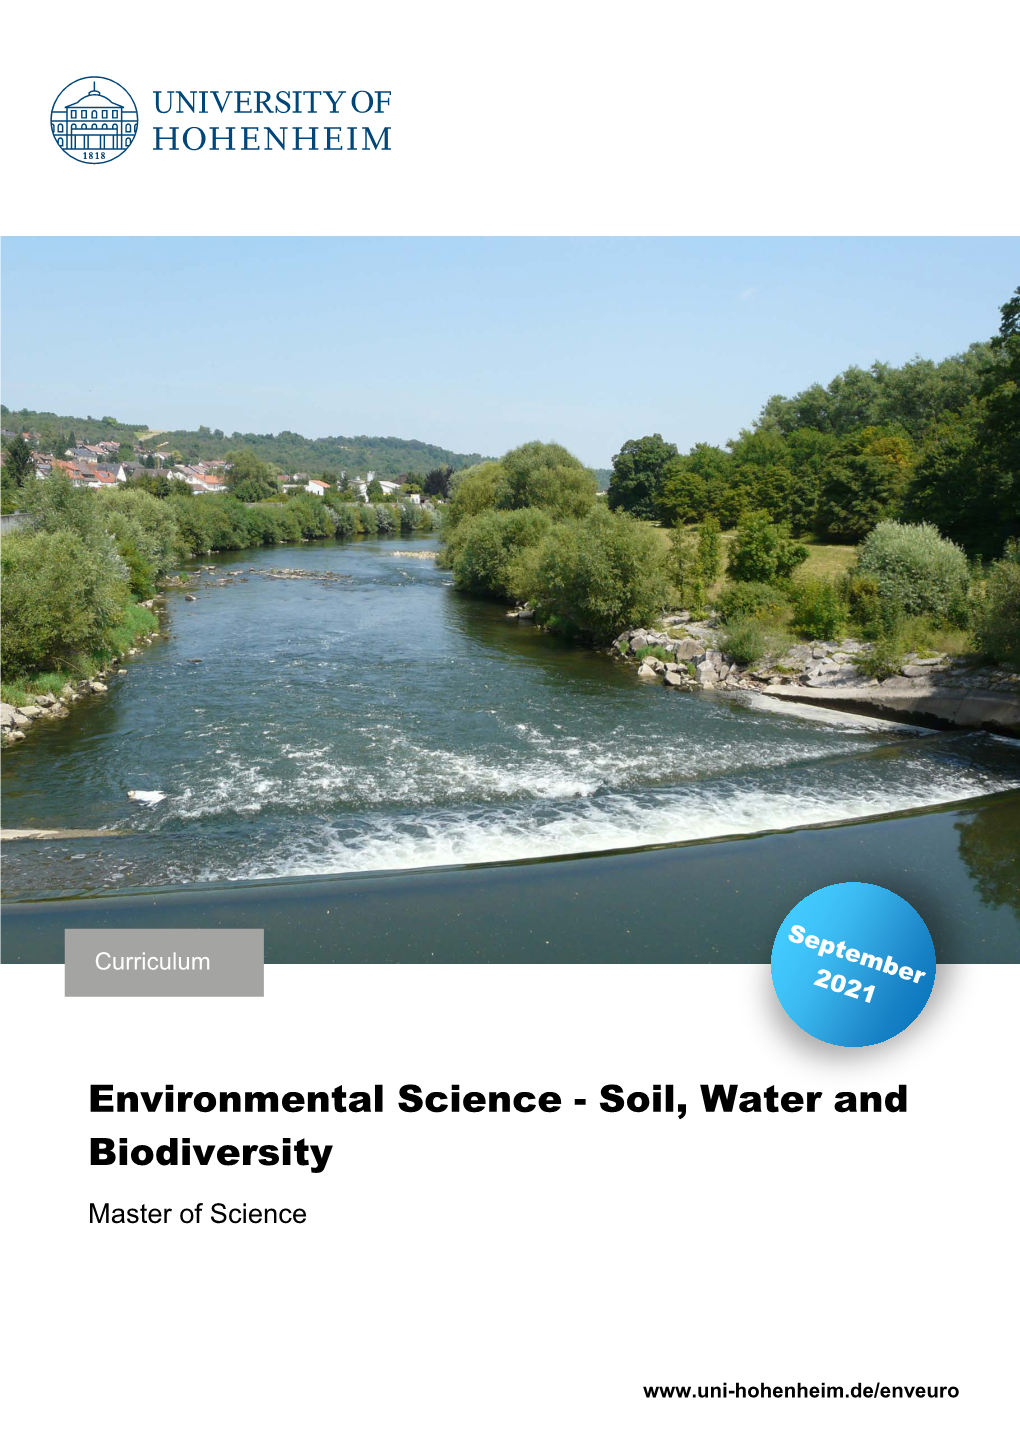 Environmental Science - Soil, Water and Biodiversity